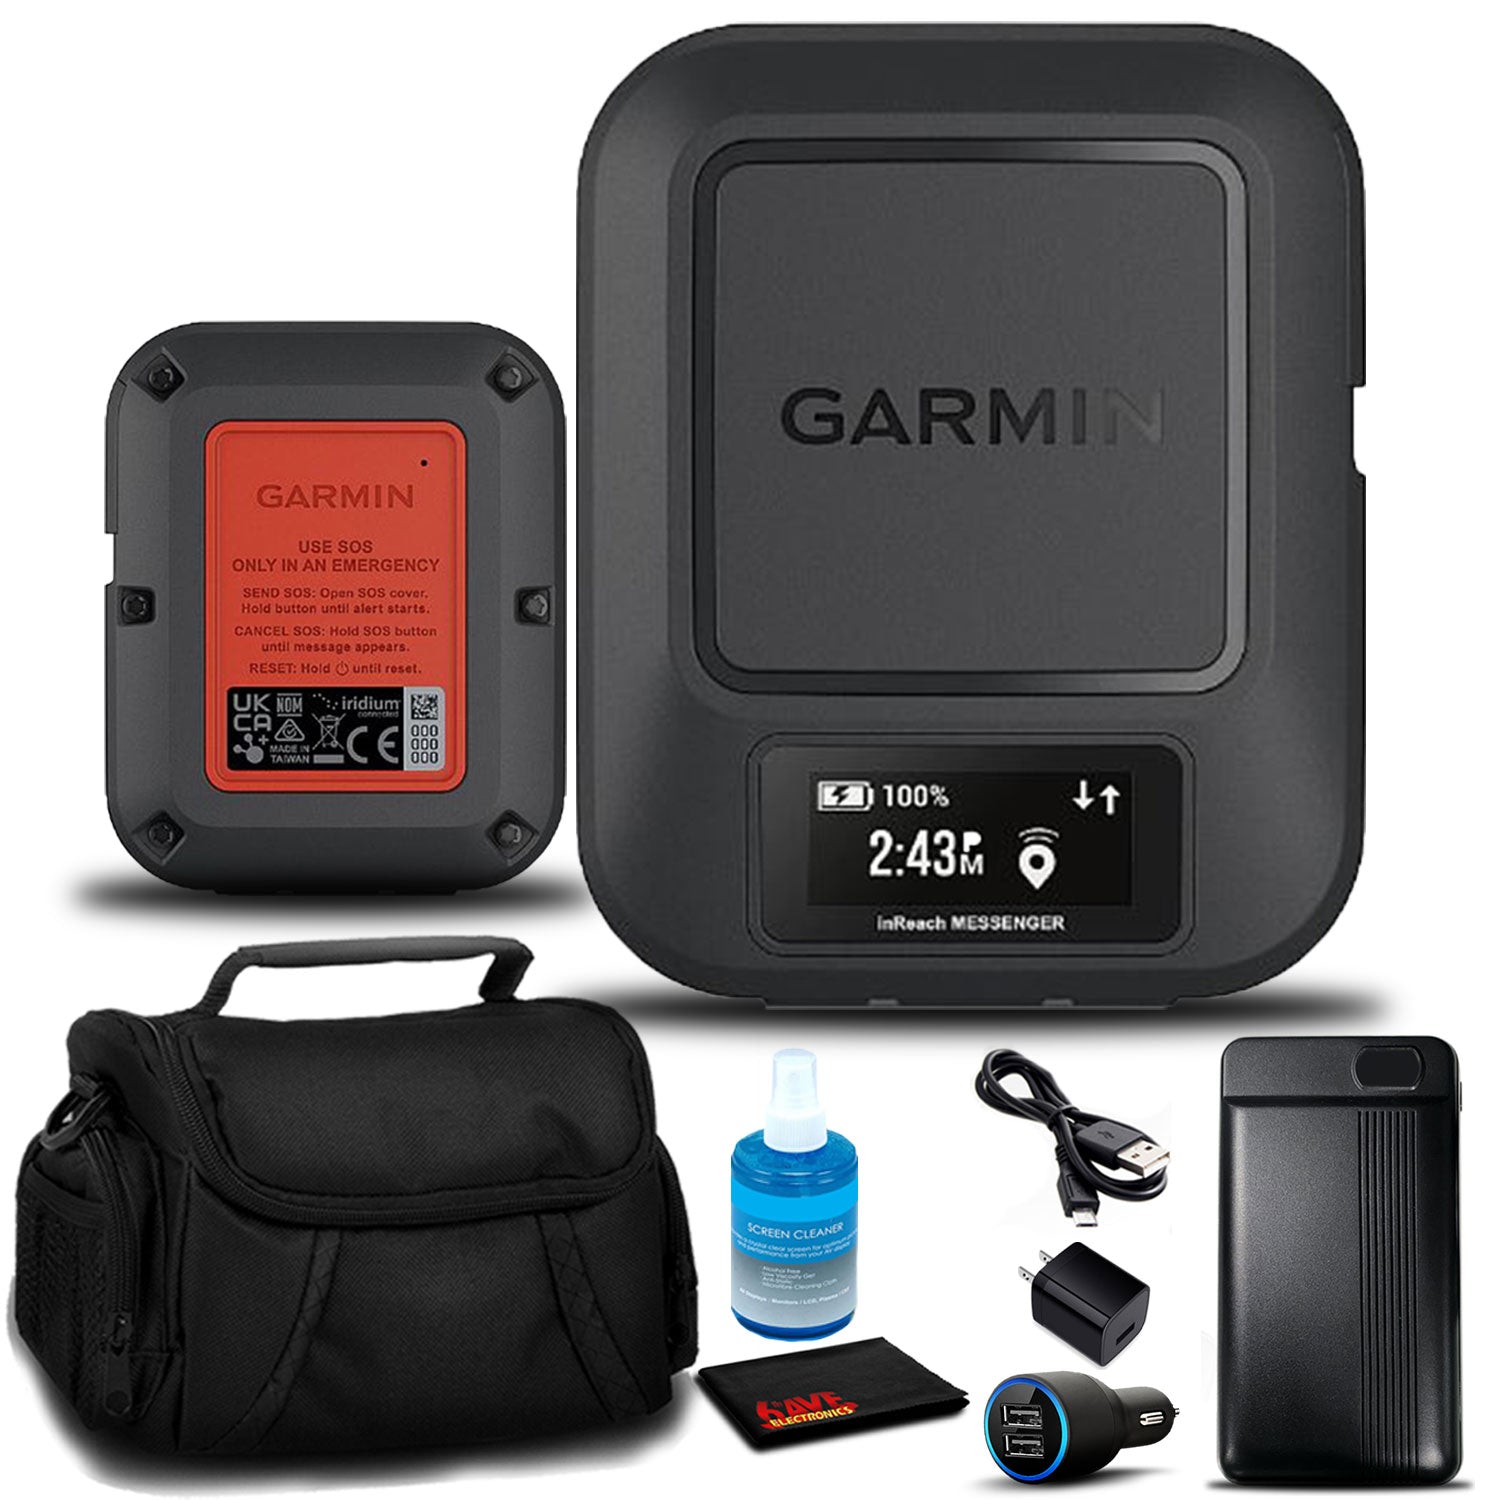 Garmin inReach Messenger GPS with Battery Charger, Bag, and More